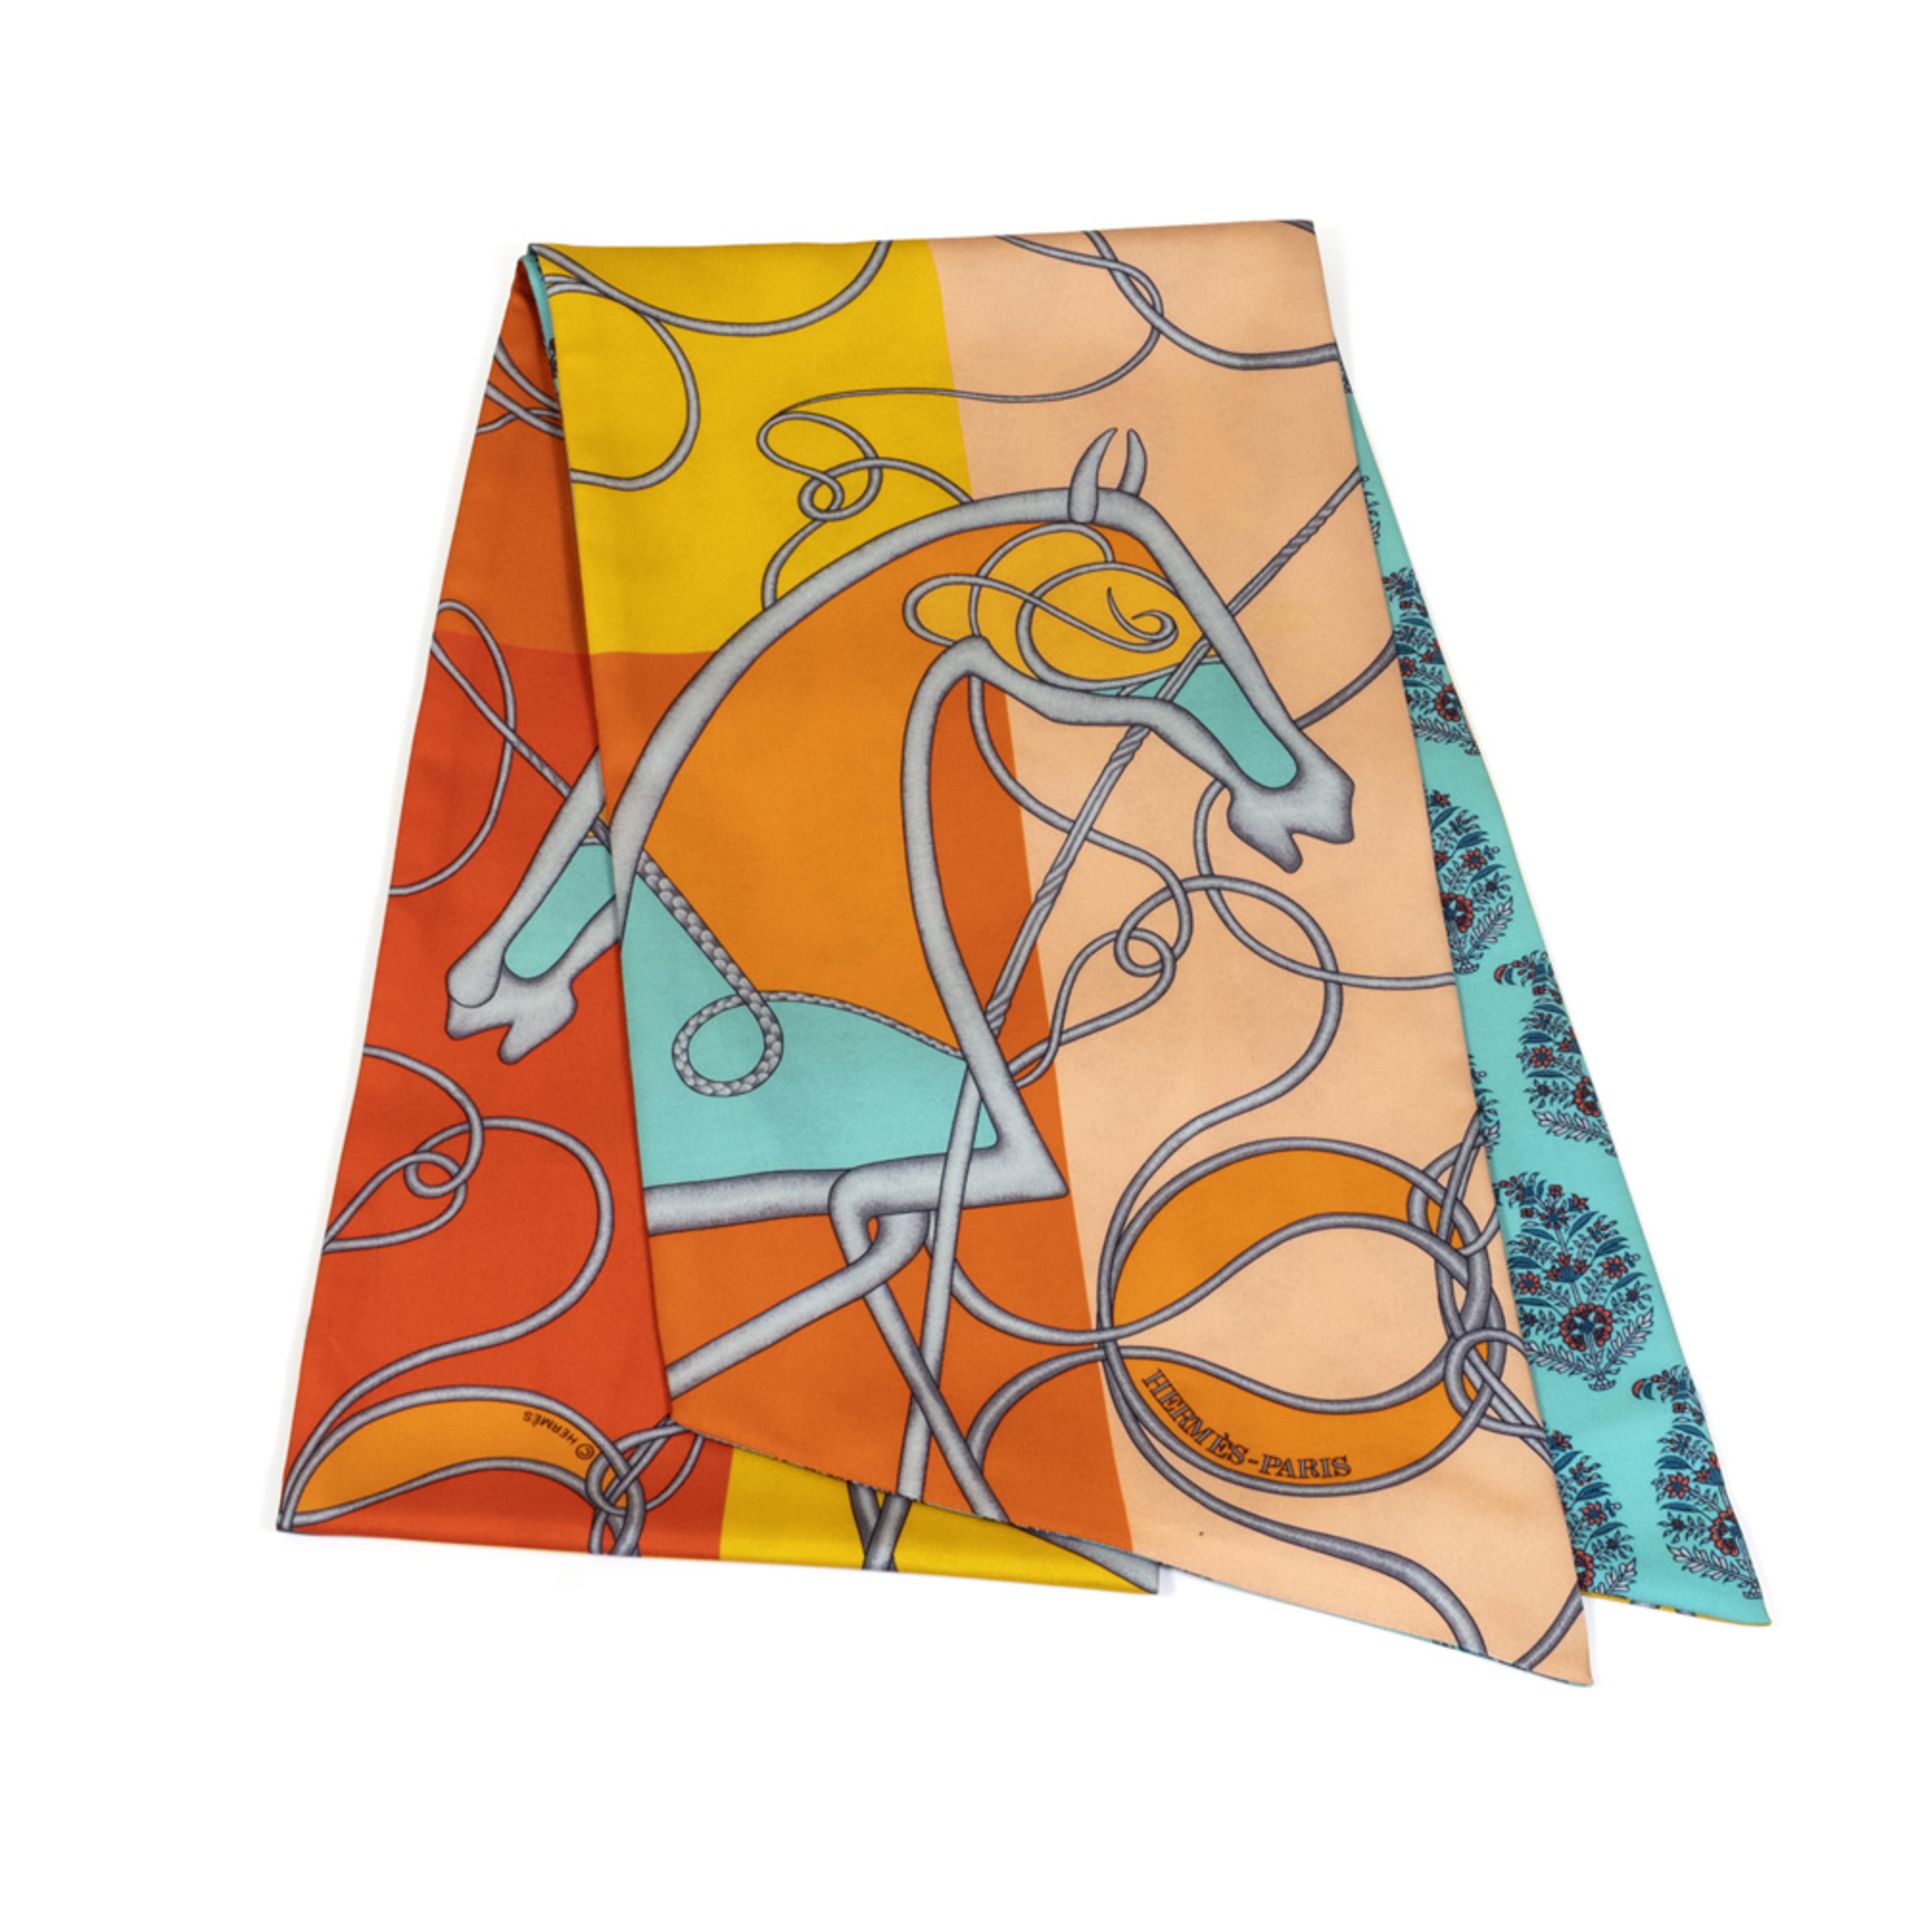 Hermes Maxi Twilly vintage scarf